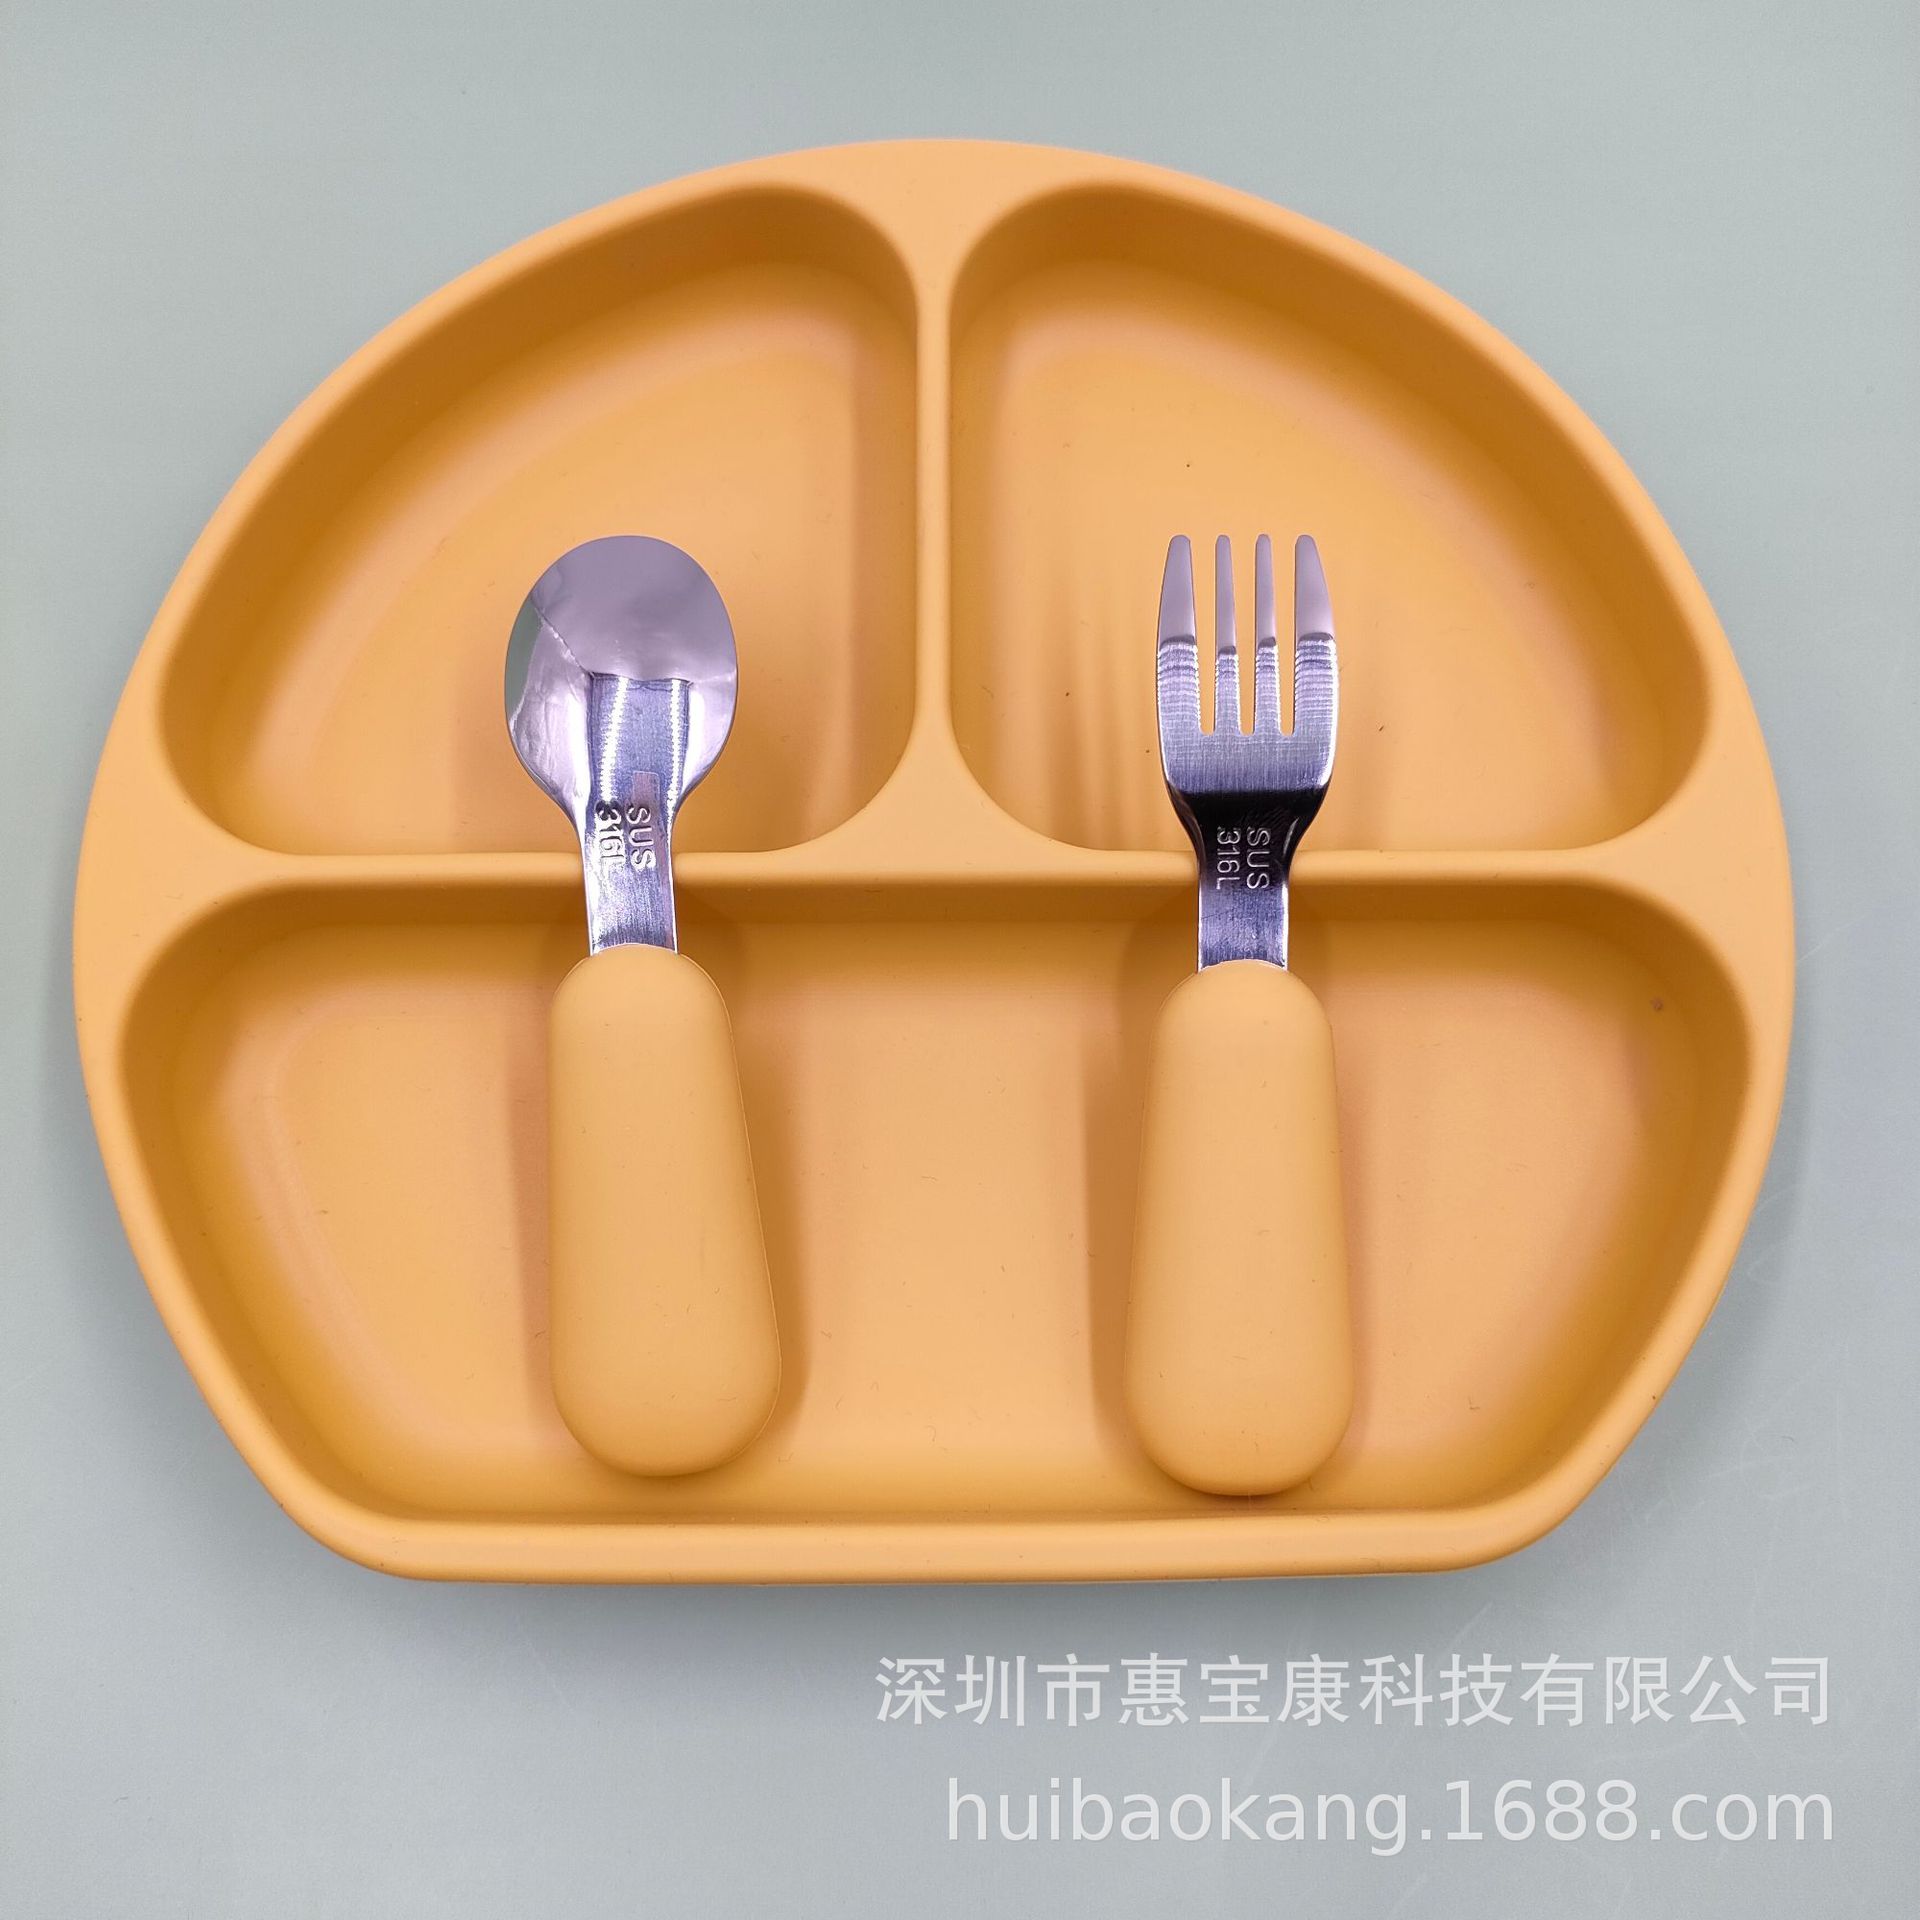 Silicone Children's Suction Cup Plate Strong Suction Baby Food Supplement Tableware 316 Stainless Steel Short Handle Fork Spoon